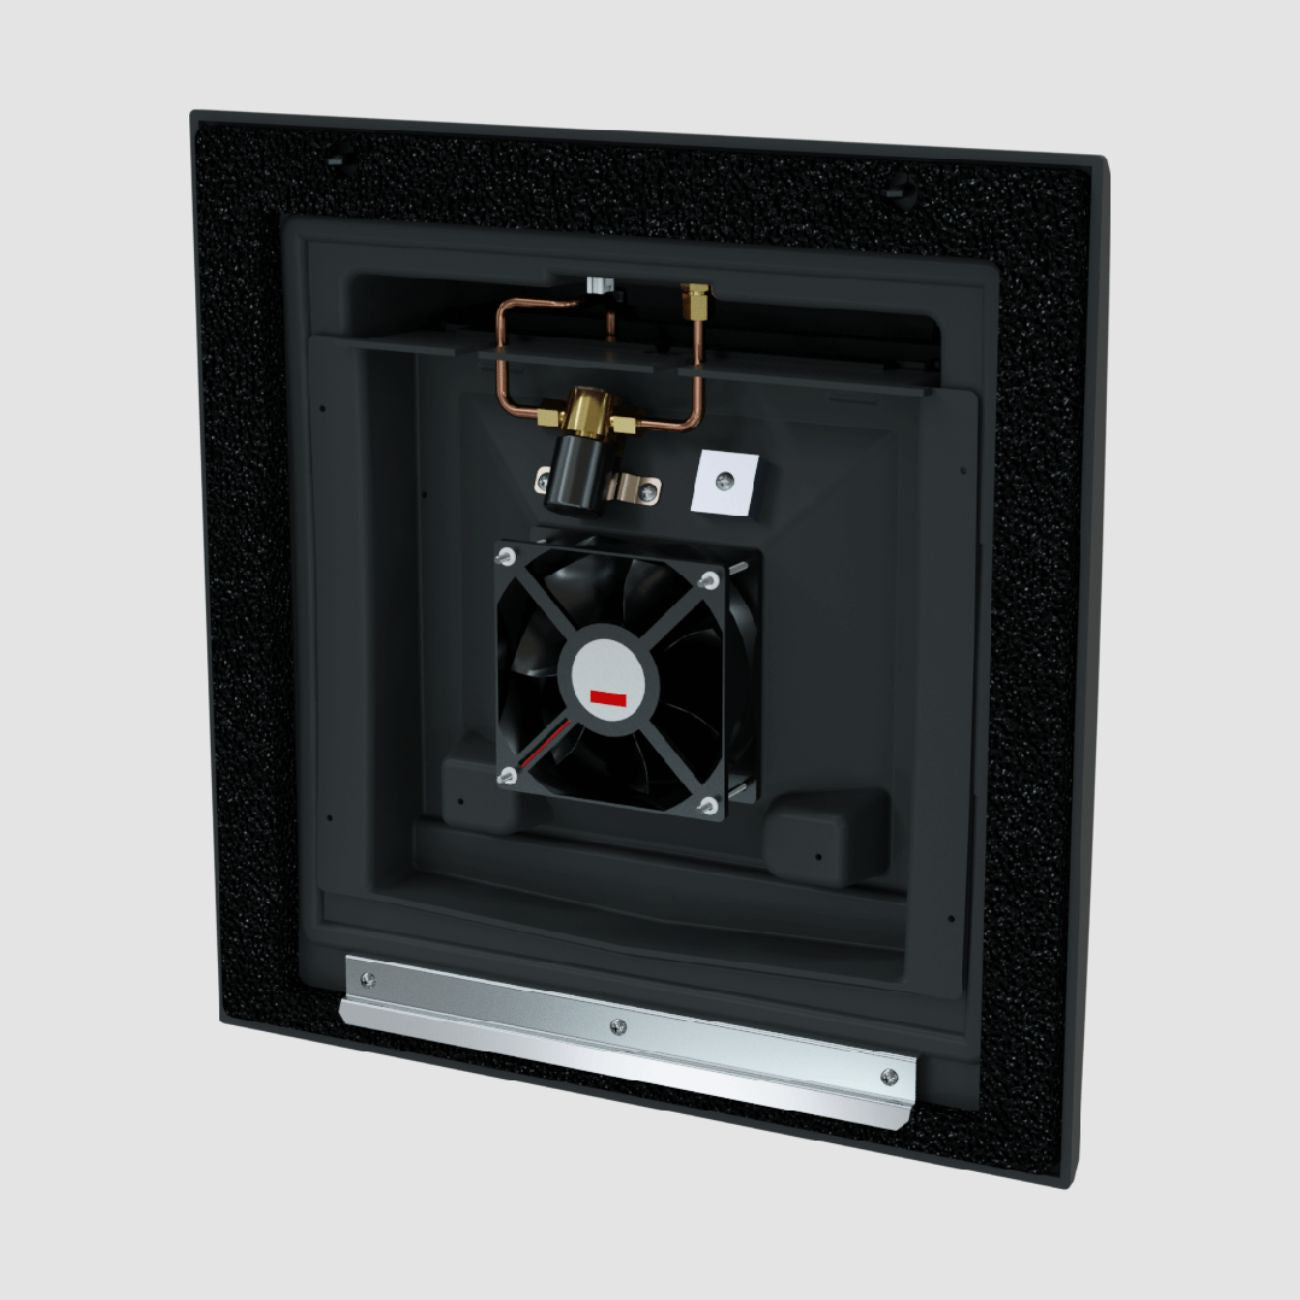 integrated humidifier view inside WINE GUARDIAN DS200 DUCTED SPLIT COOLING UNIT